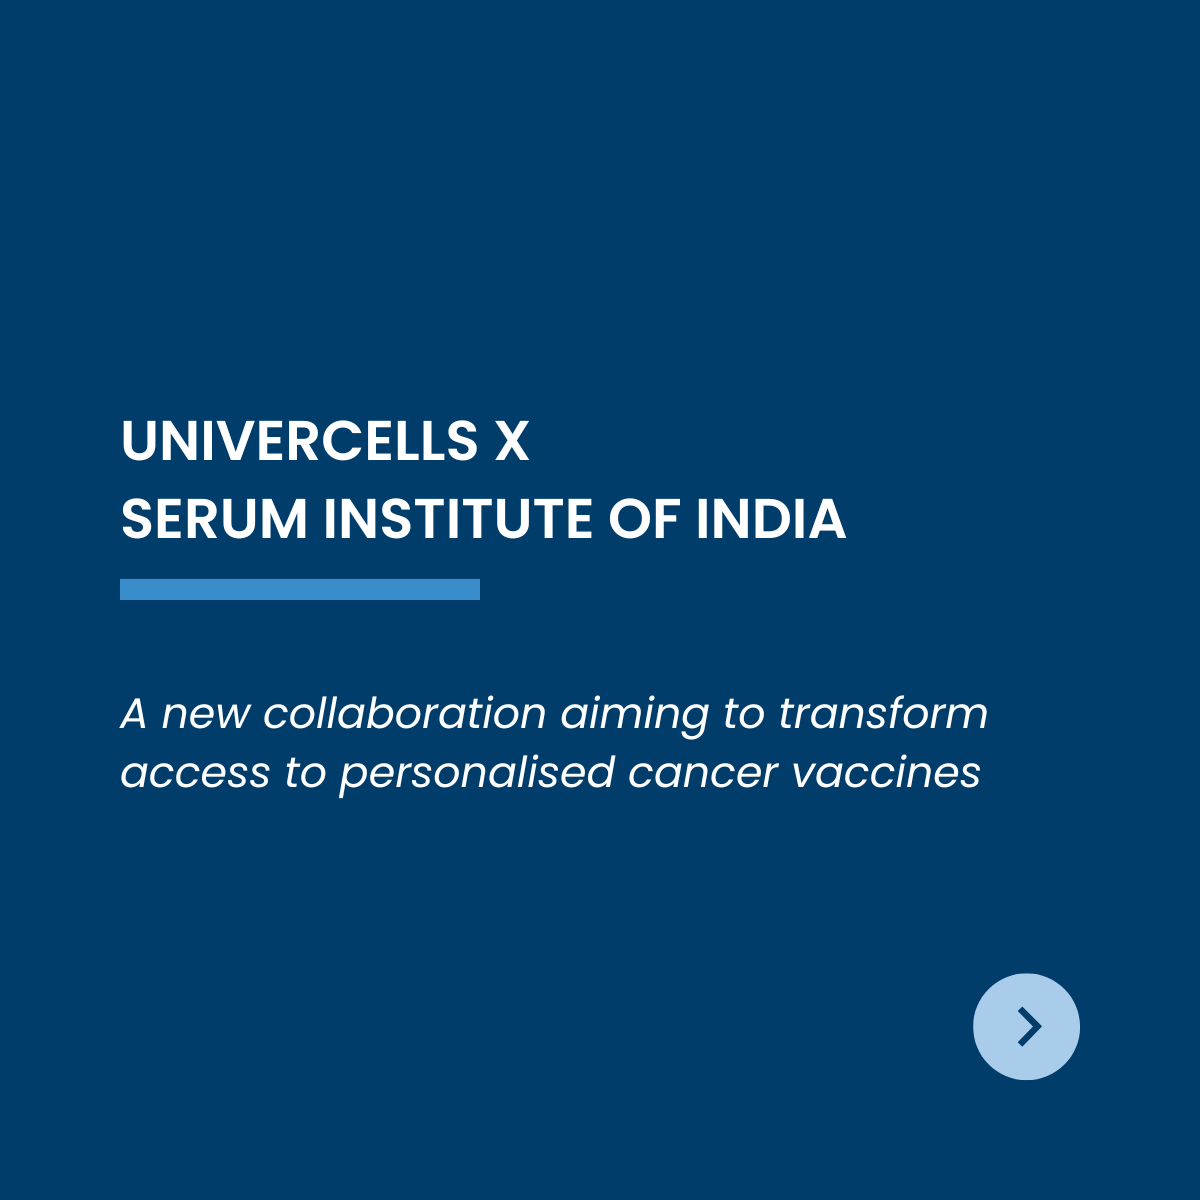 Press Release: Serum Institute of India Collaborates with Univercells to bring Affordable Personalized Oncology to Masses